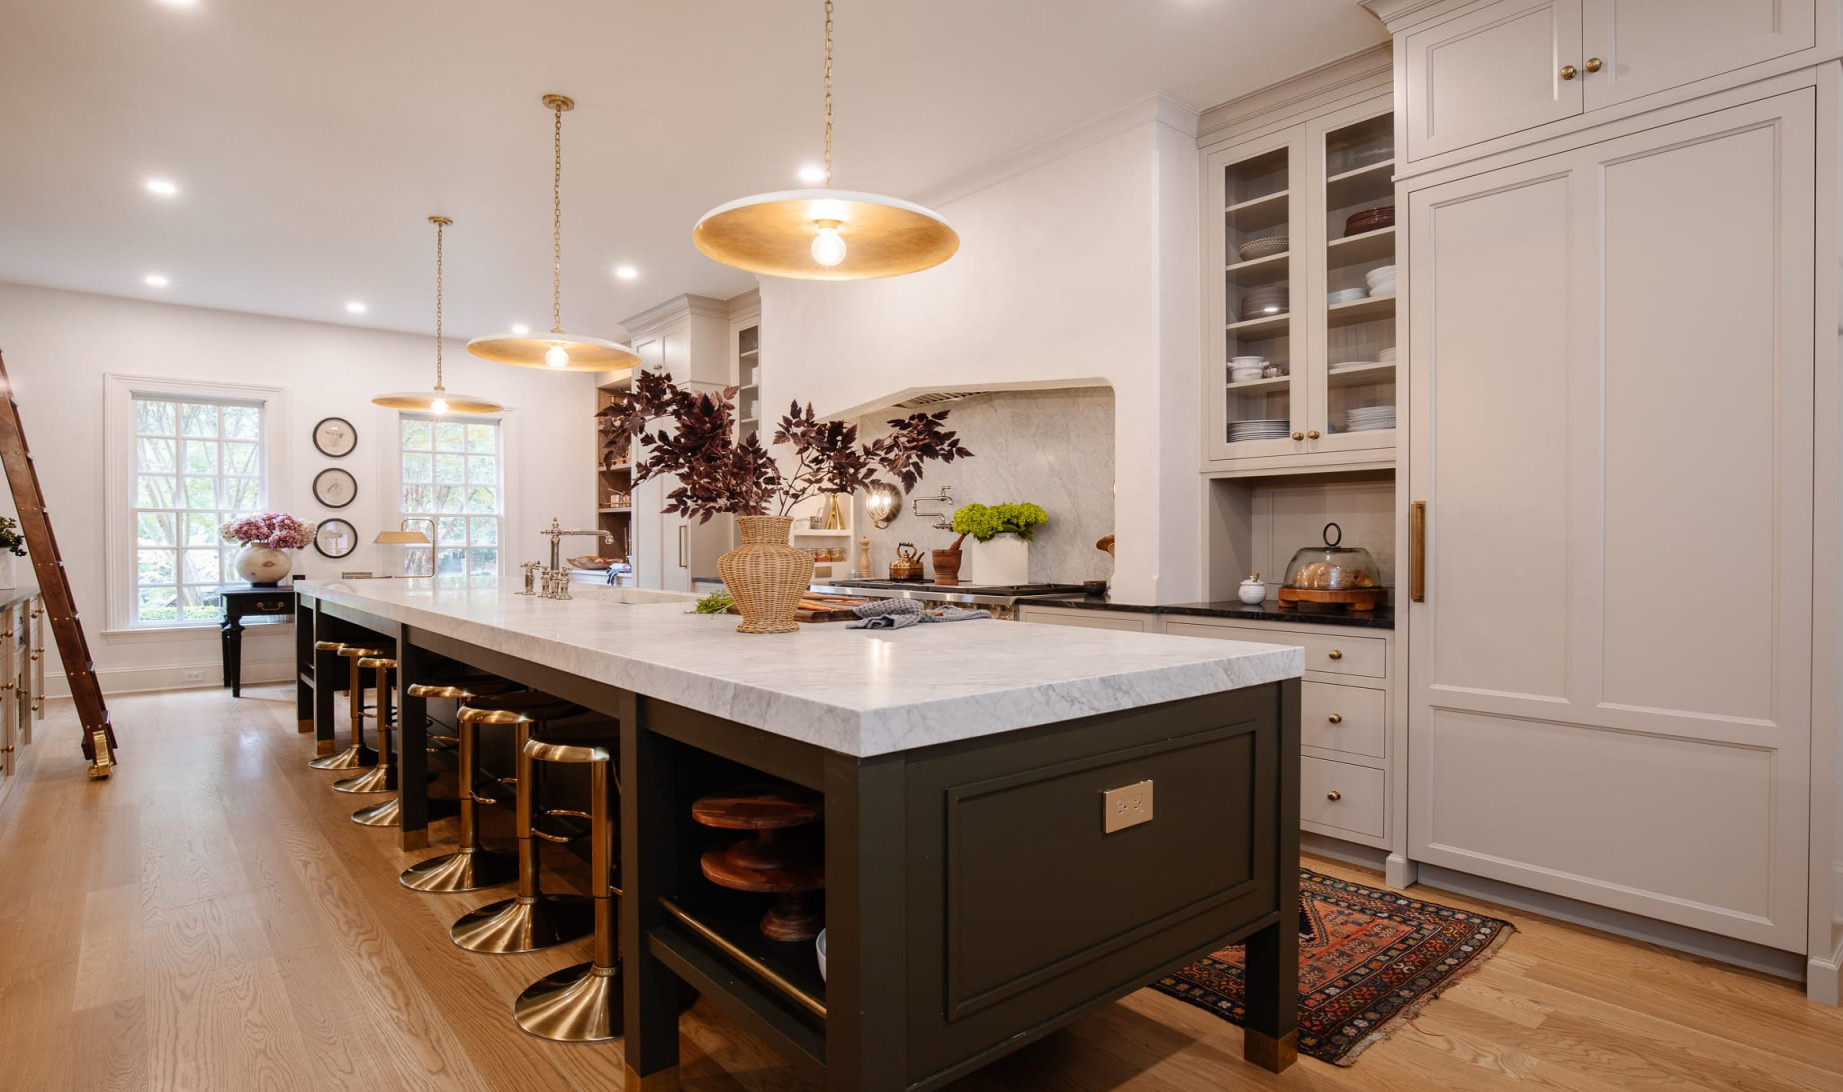 The Final Reveal of Our Modern Colonial Kitchen